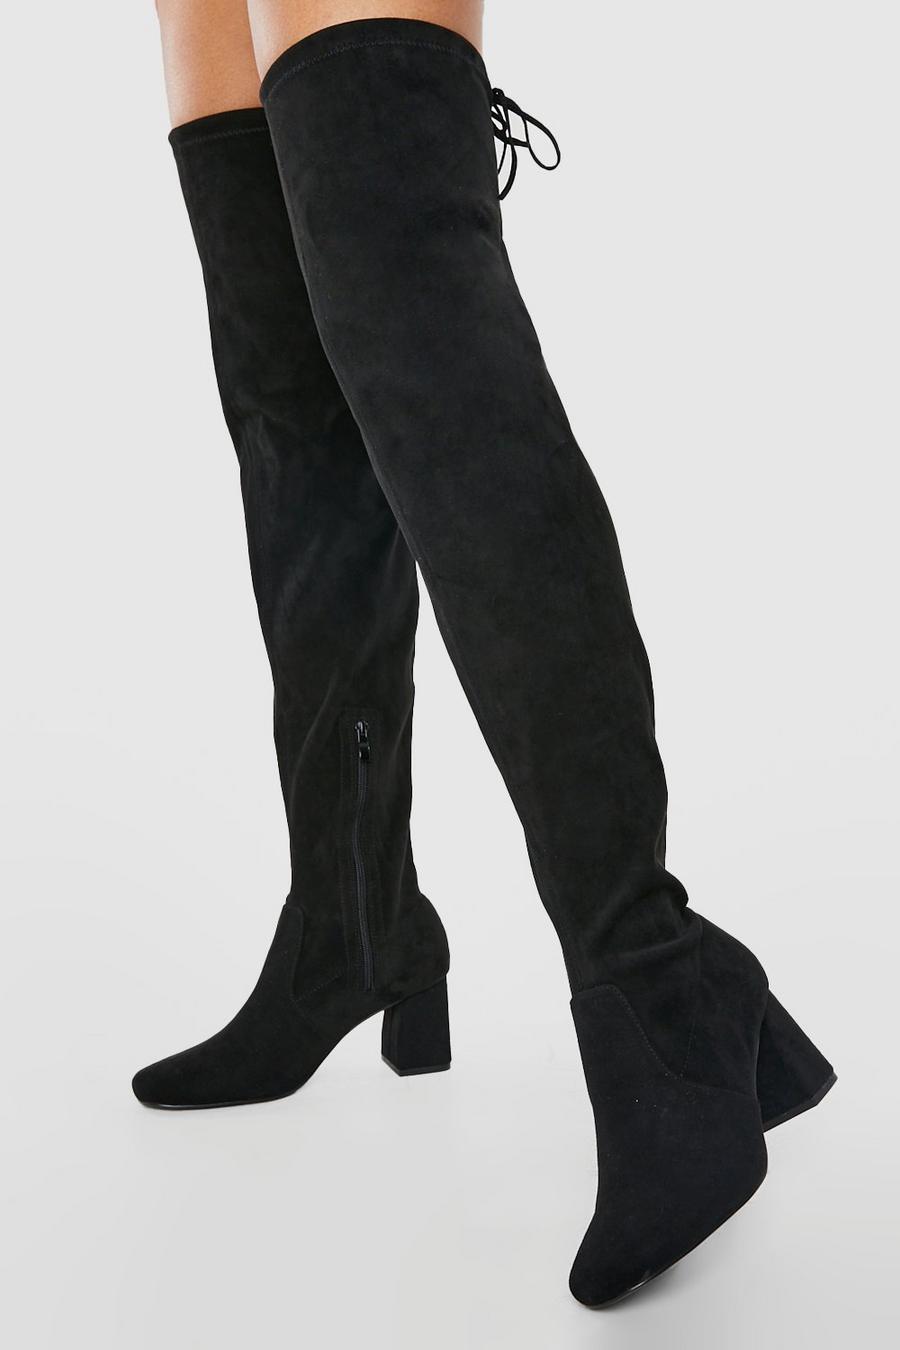 Black Wide Fit Over The Knee Block Heeled Boots